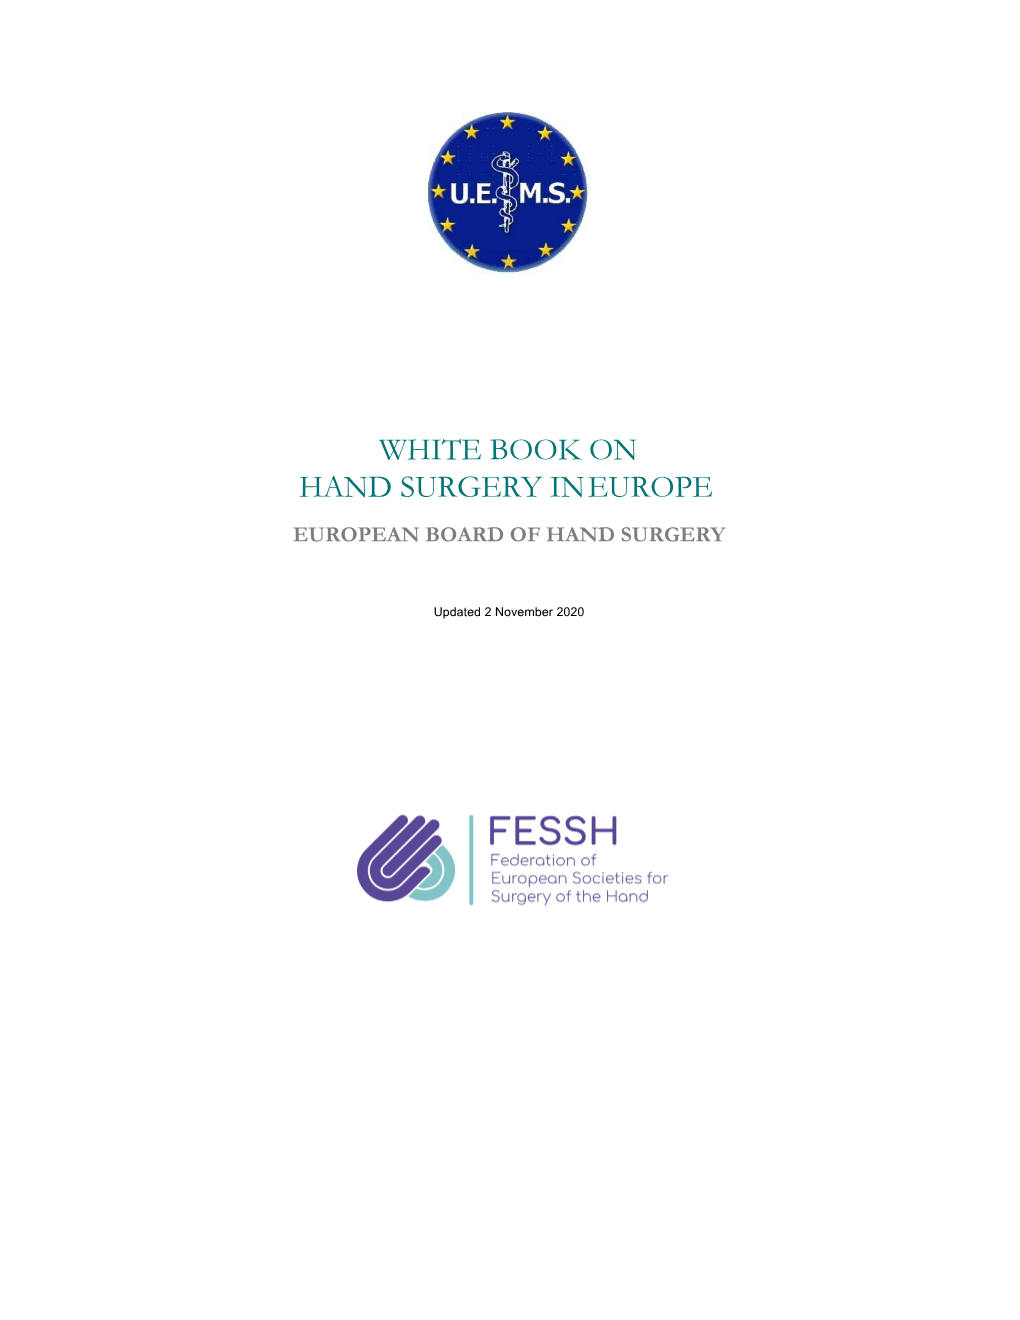 White Book on Hand Surgery in Europe European Board of Hand Surgery